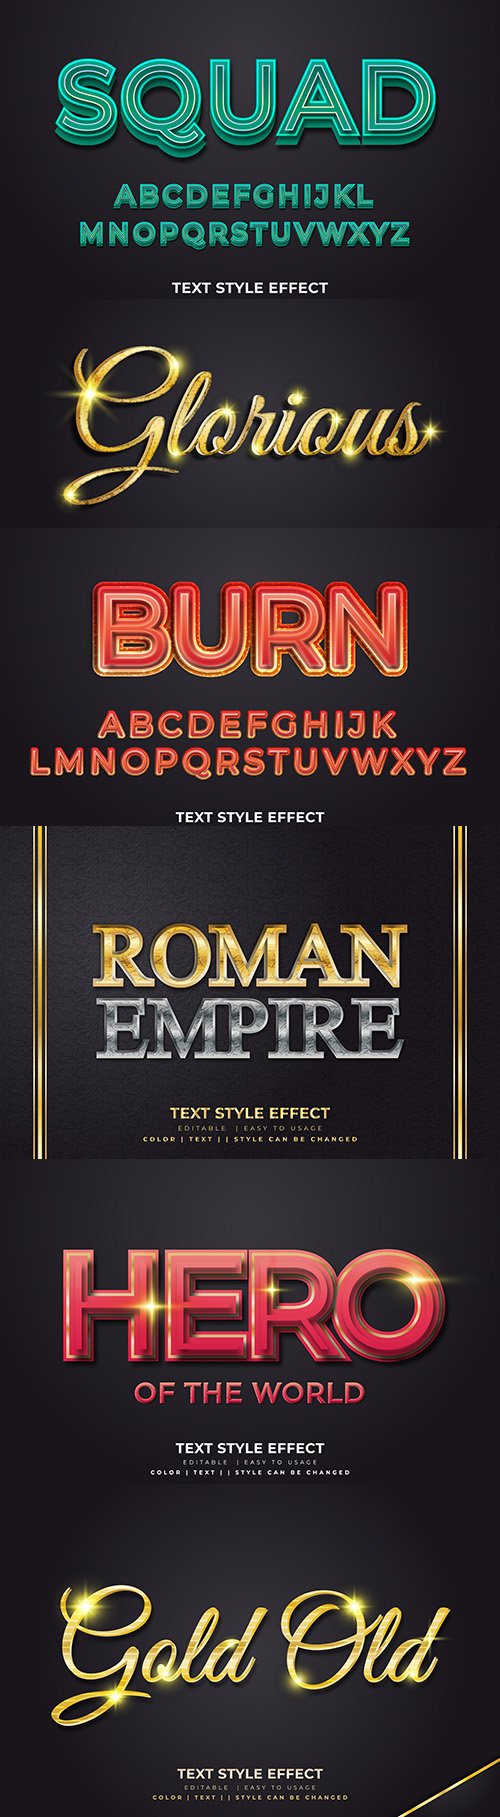 3d text style with gold and texture effect